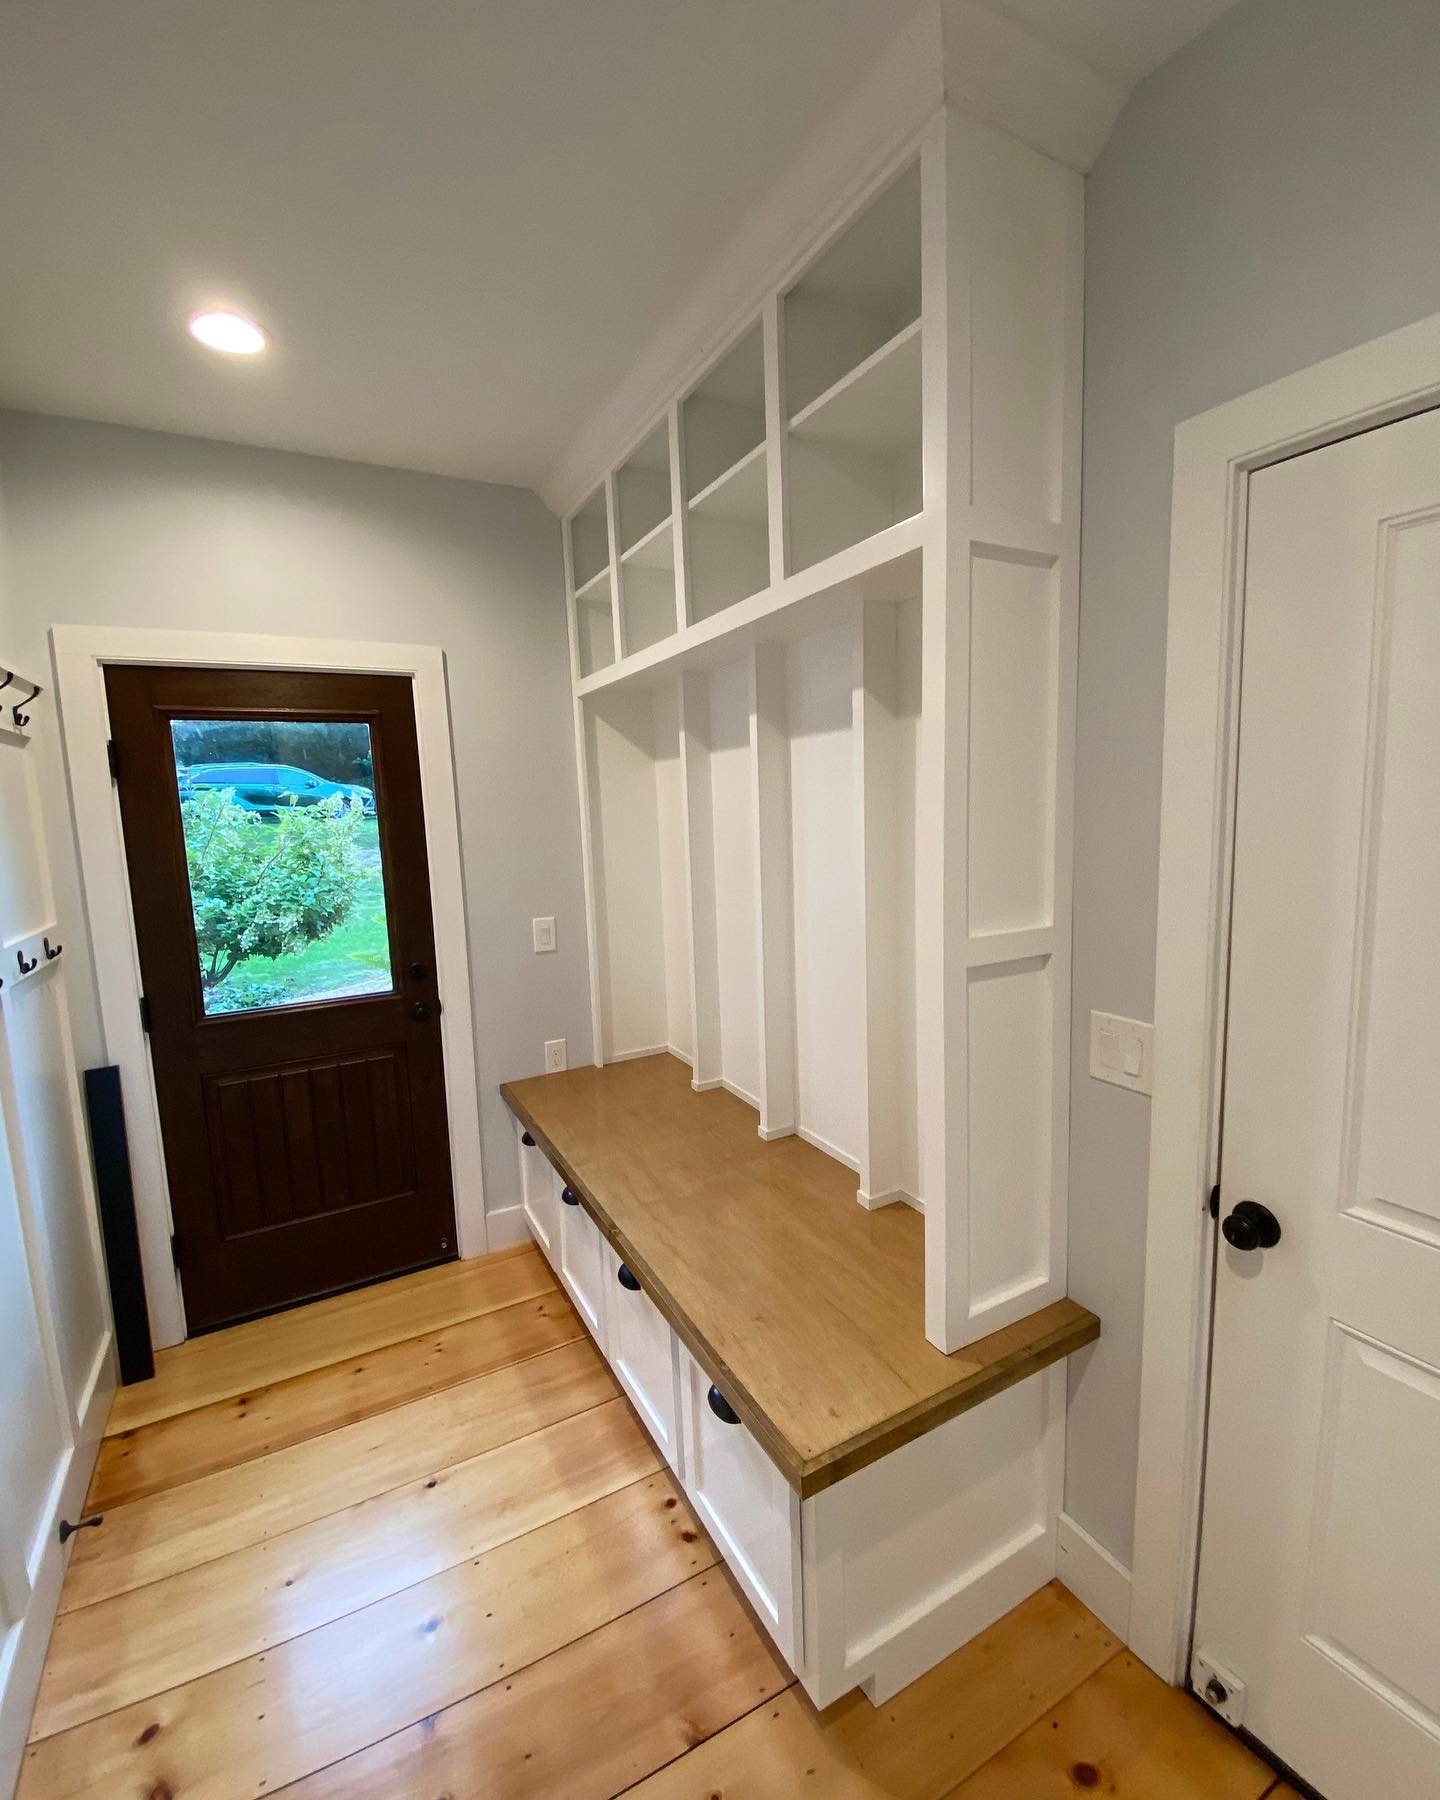 Adding a mudroom is a great carpentry project to elevate your home.